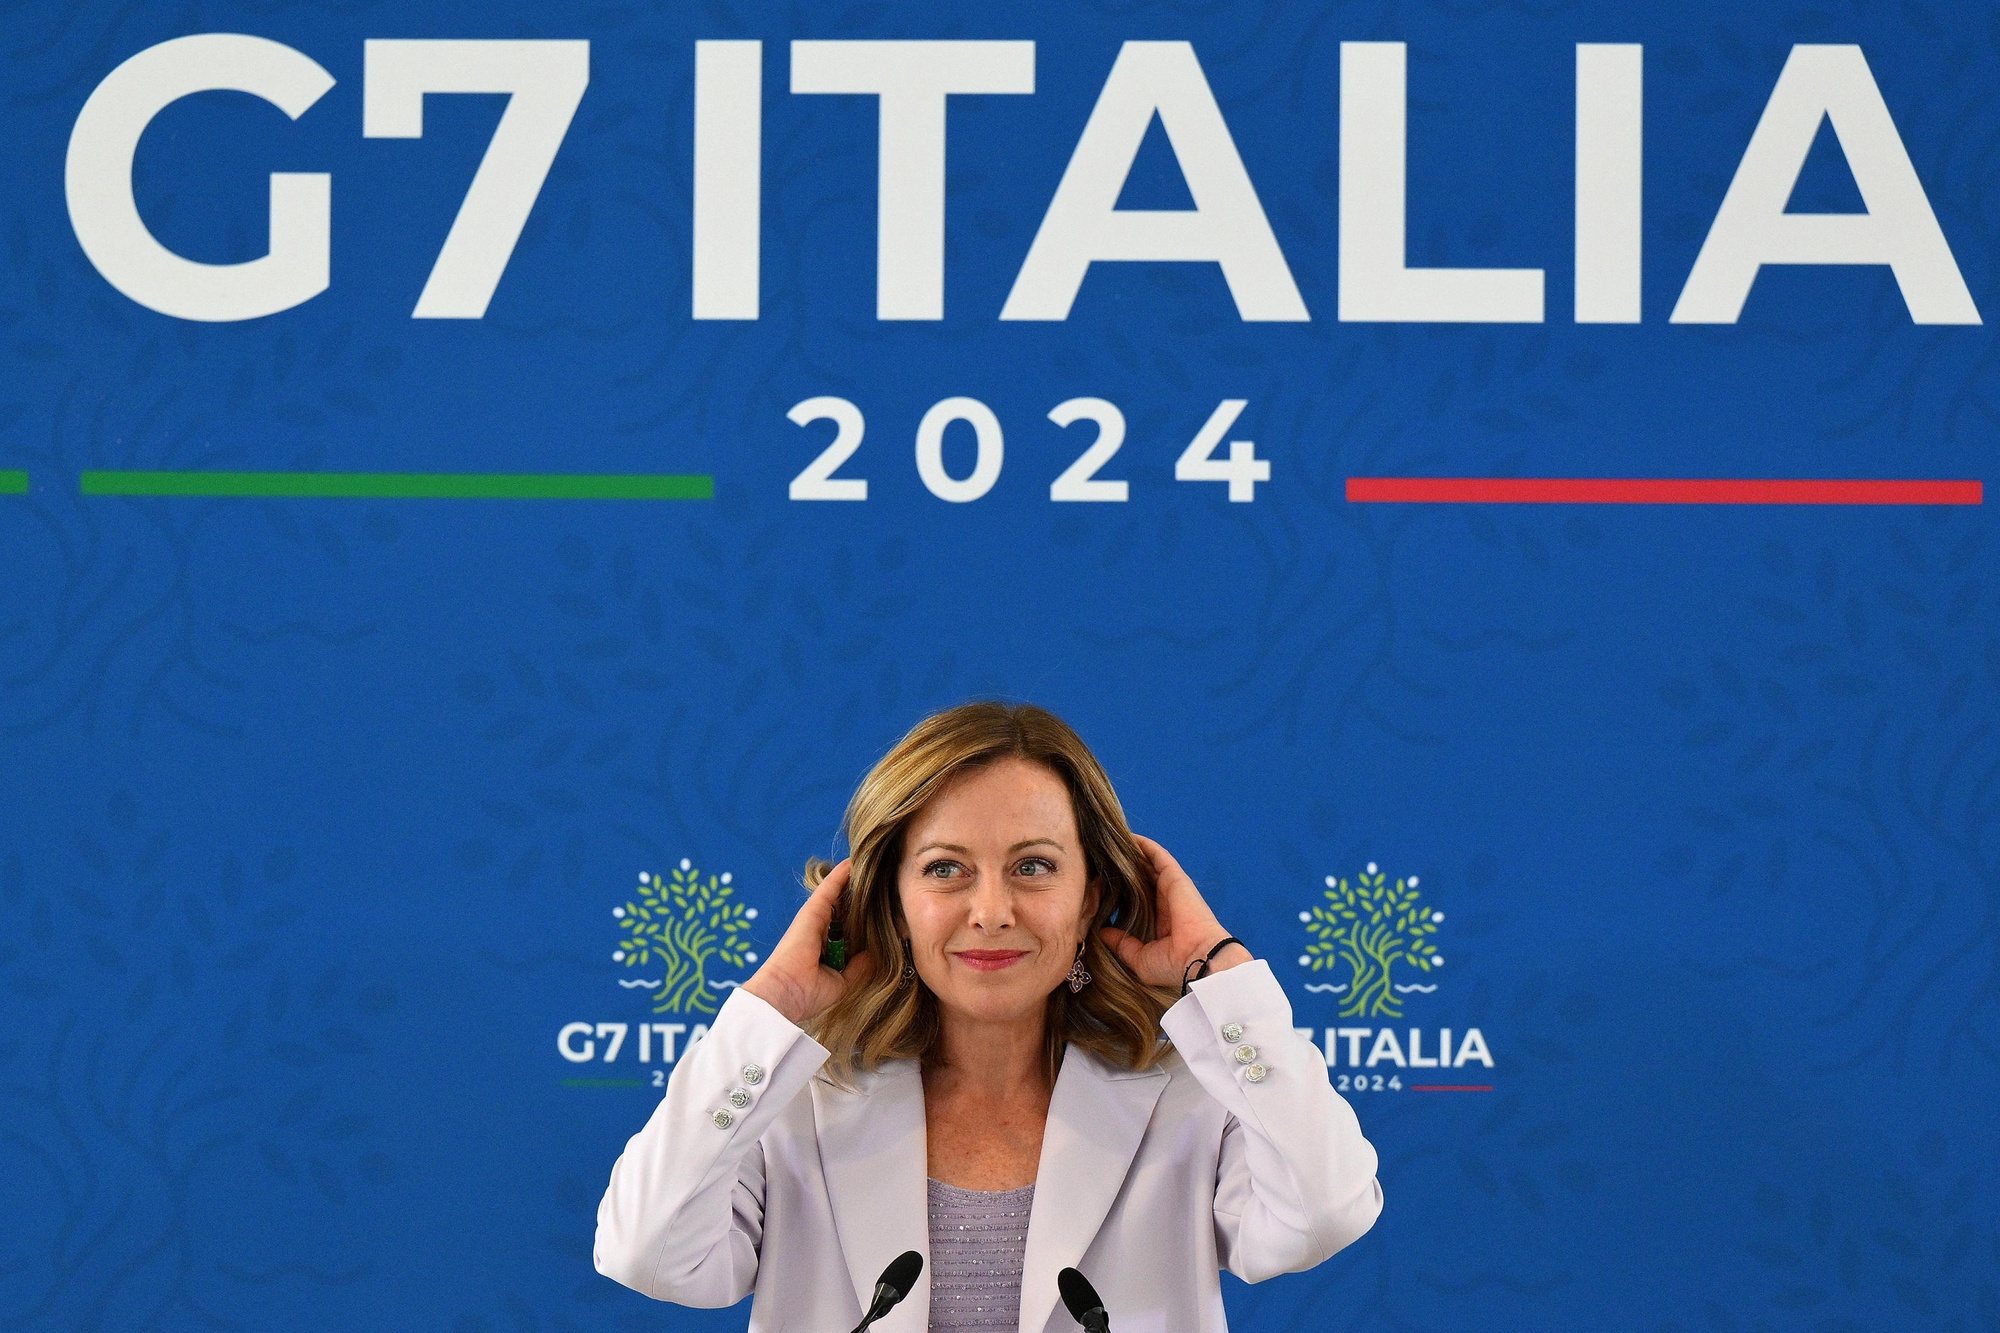 epa11411965 Italian Prime Minister Giorgia Meloni holds a press conference after the G7 summit at Borgo Egnazia resort in Savelletri, southern Italy, 15 June 2024. The 50th G7 summit brought together the Group of Seven member states leaders in Borgo Egnazia resort in southern Italy from 13 to 15 June 2024.  EPA/ETTORE FERRARI